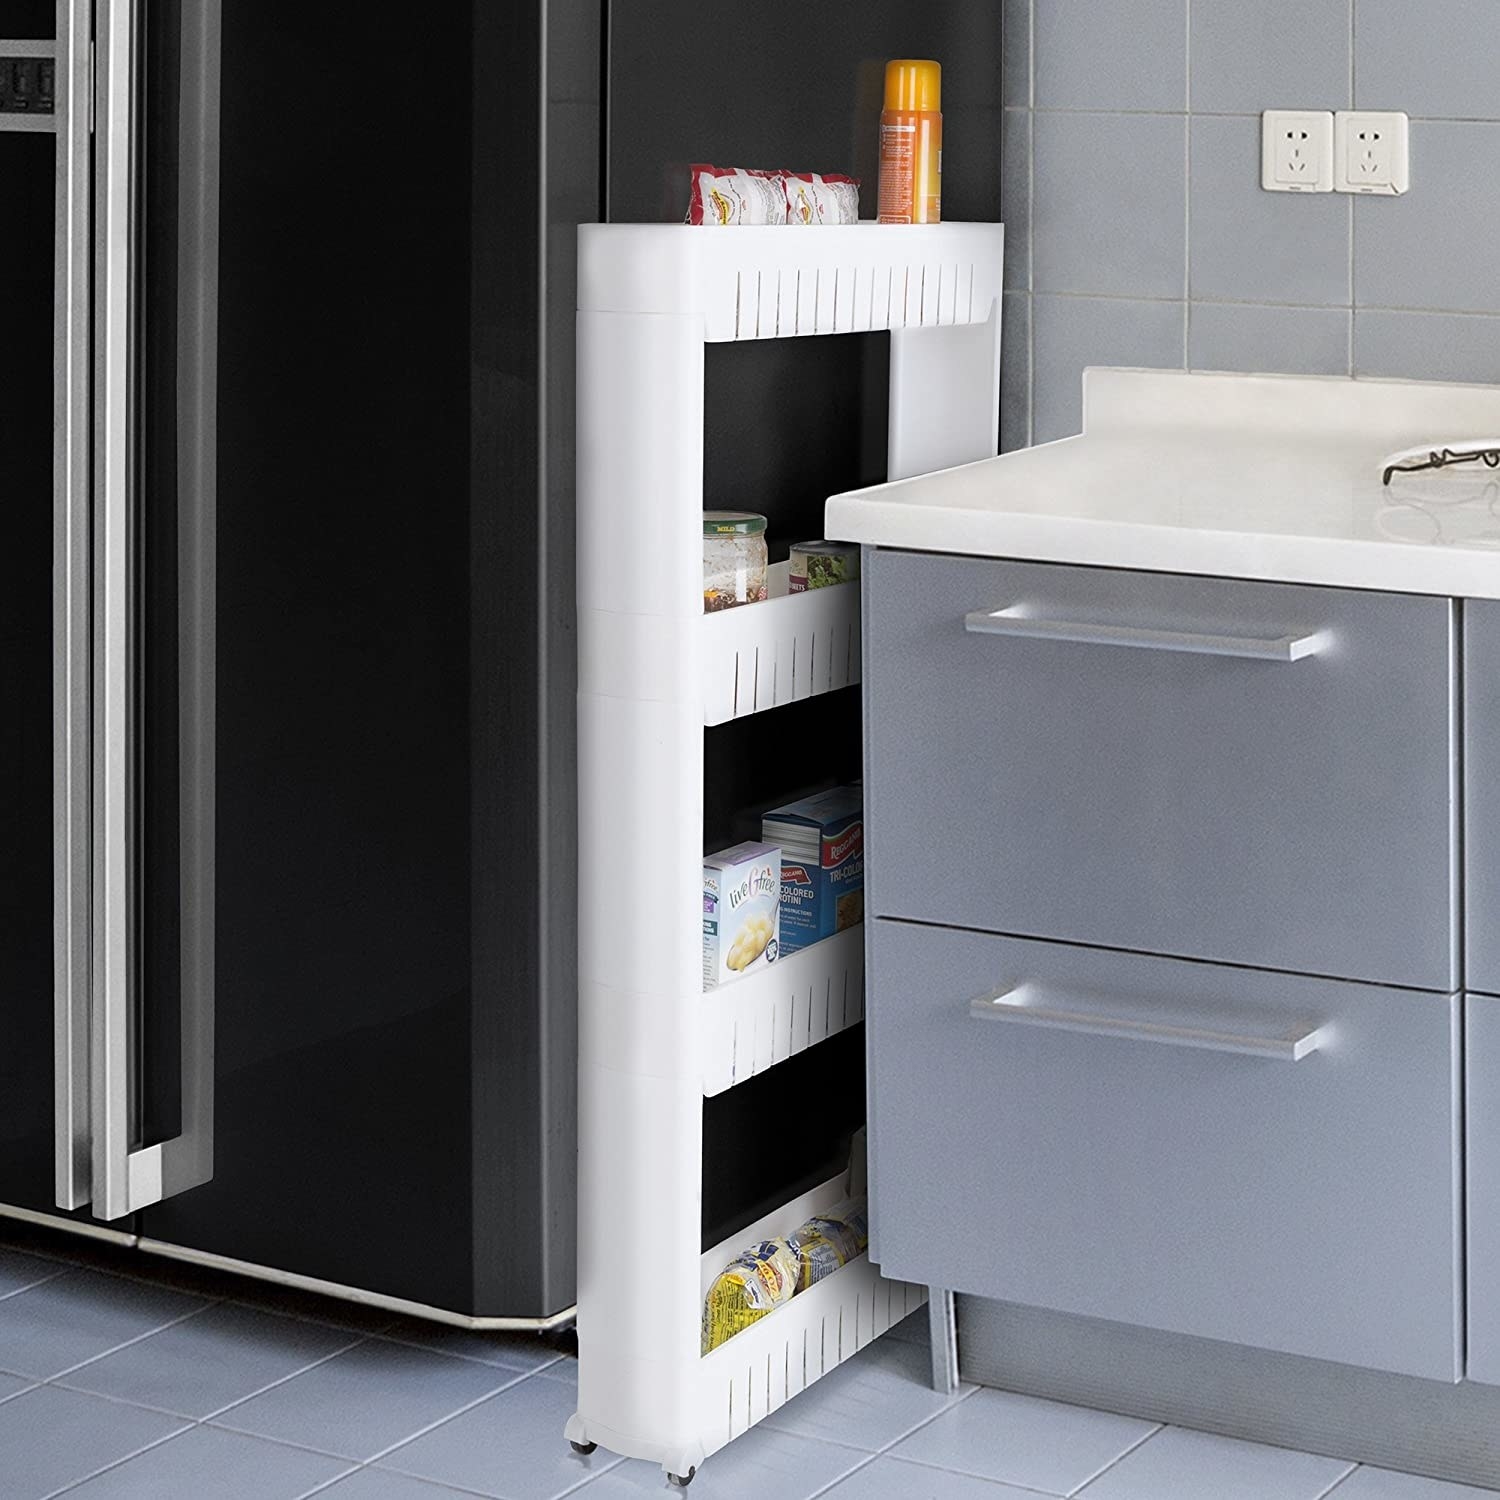 A pull-out storage unit in the gap between a counter and fridge